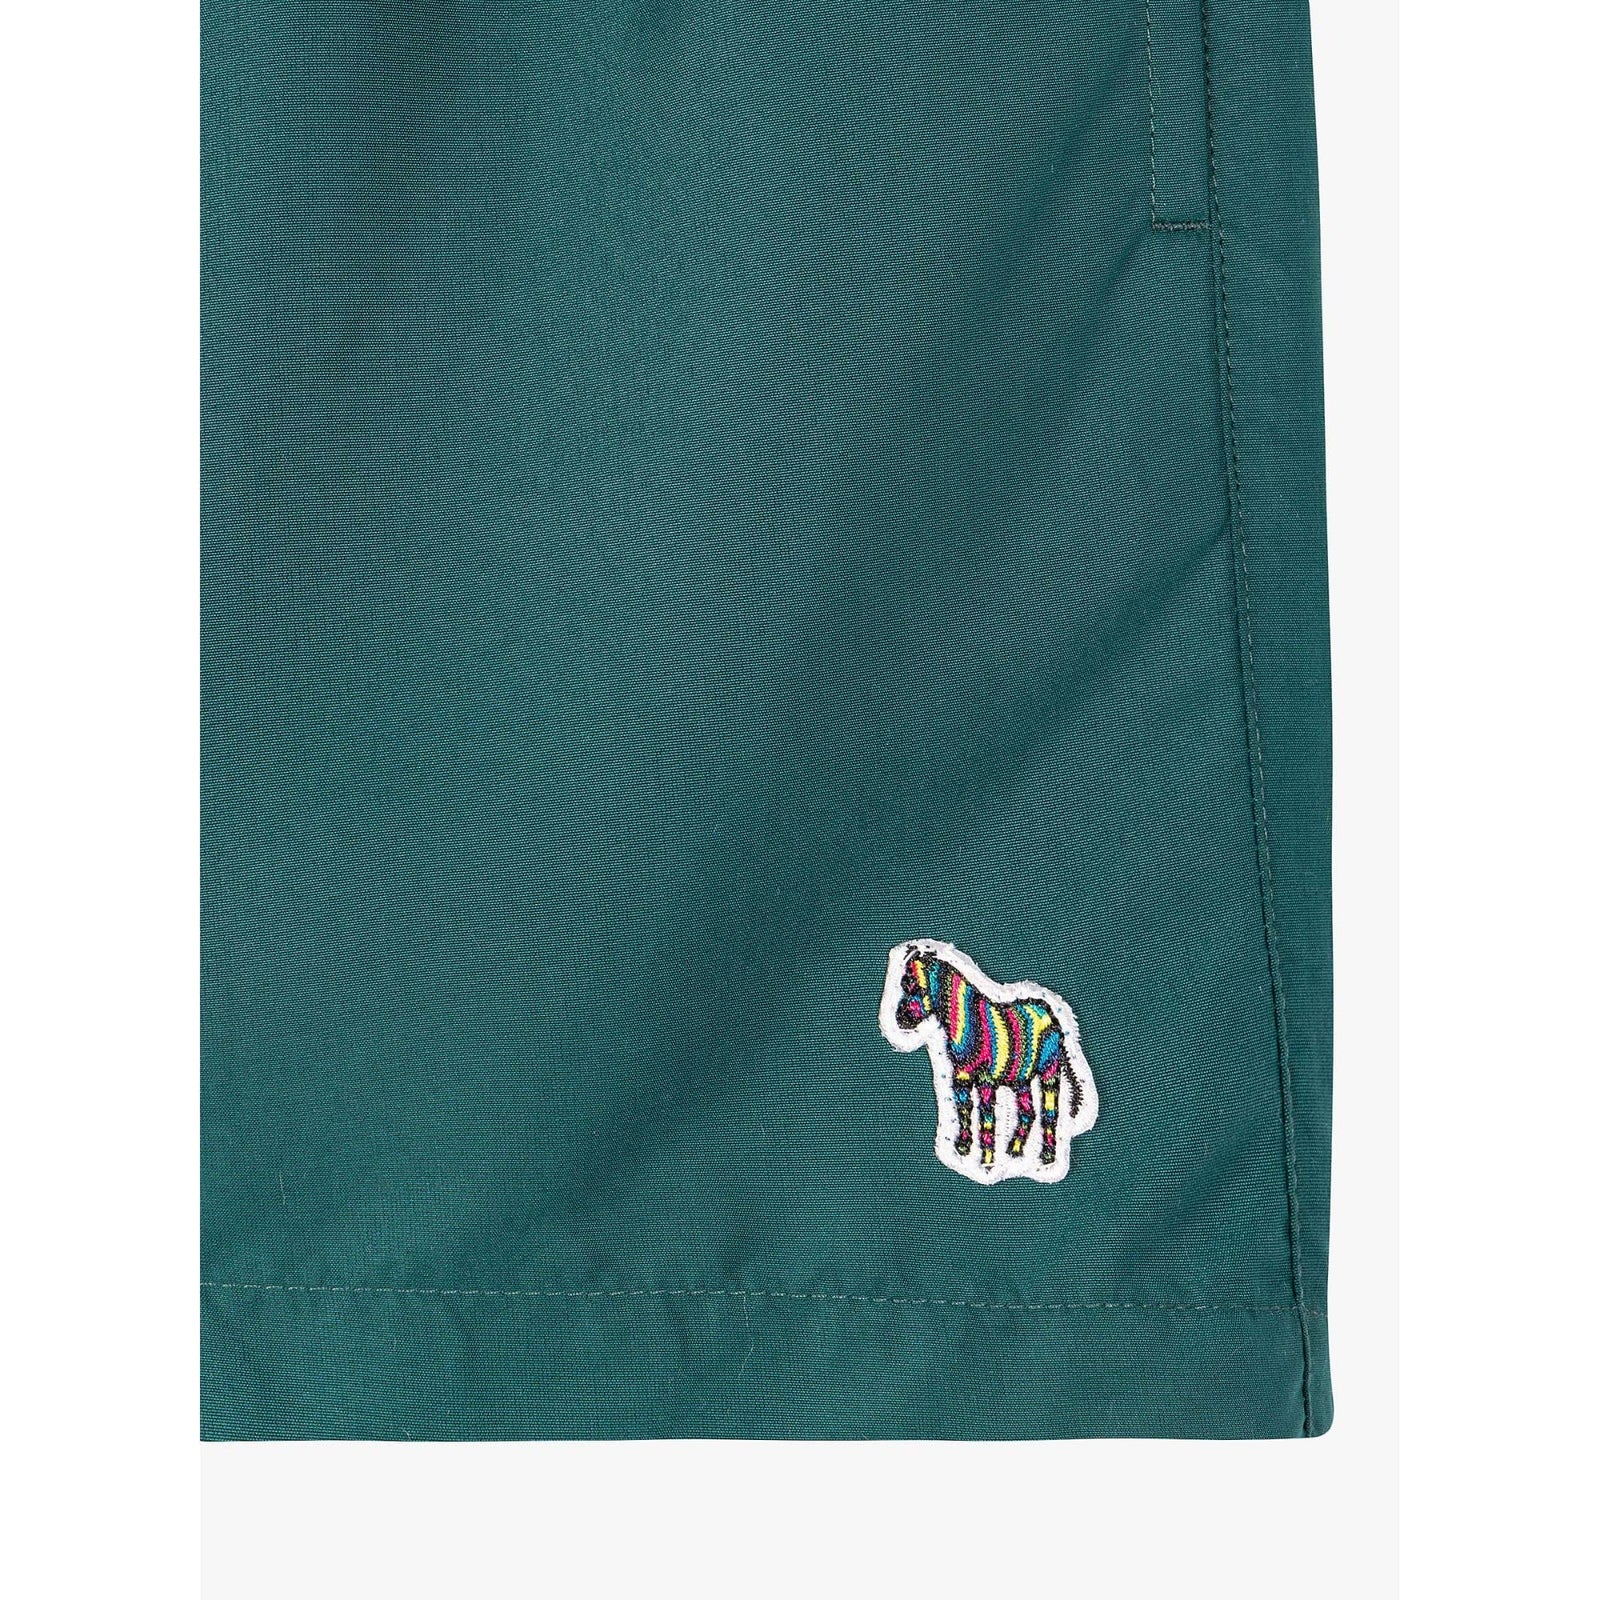 Paul Smith Zebra Logo Recycled Polyester Swim Shorts in Teal